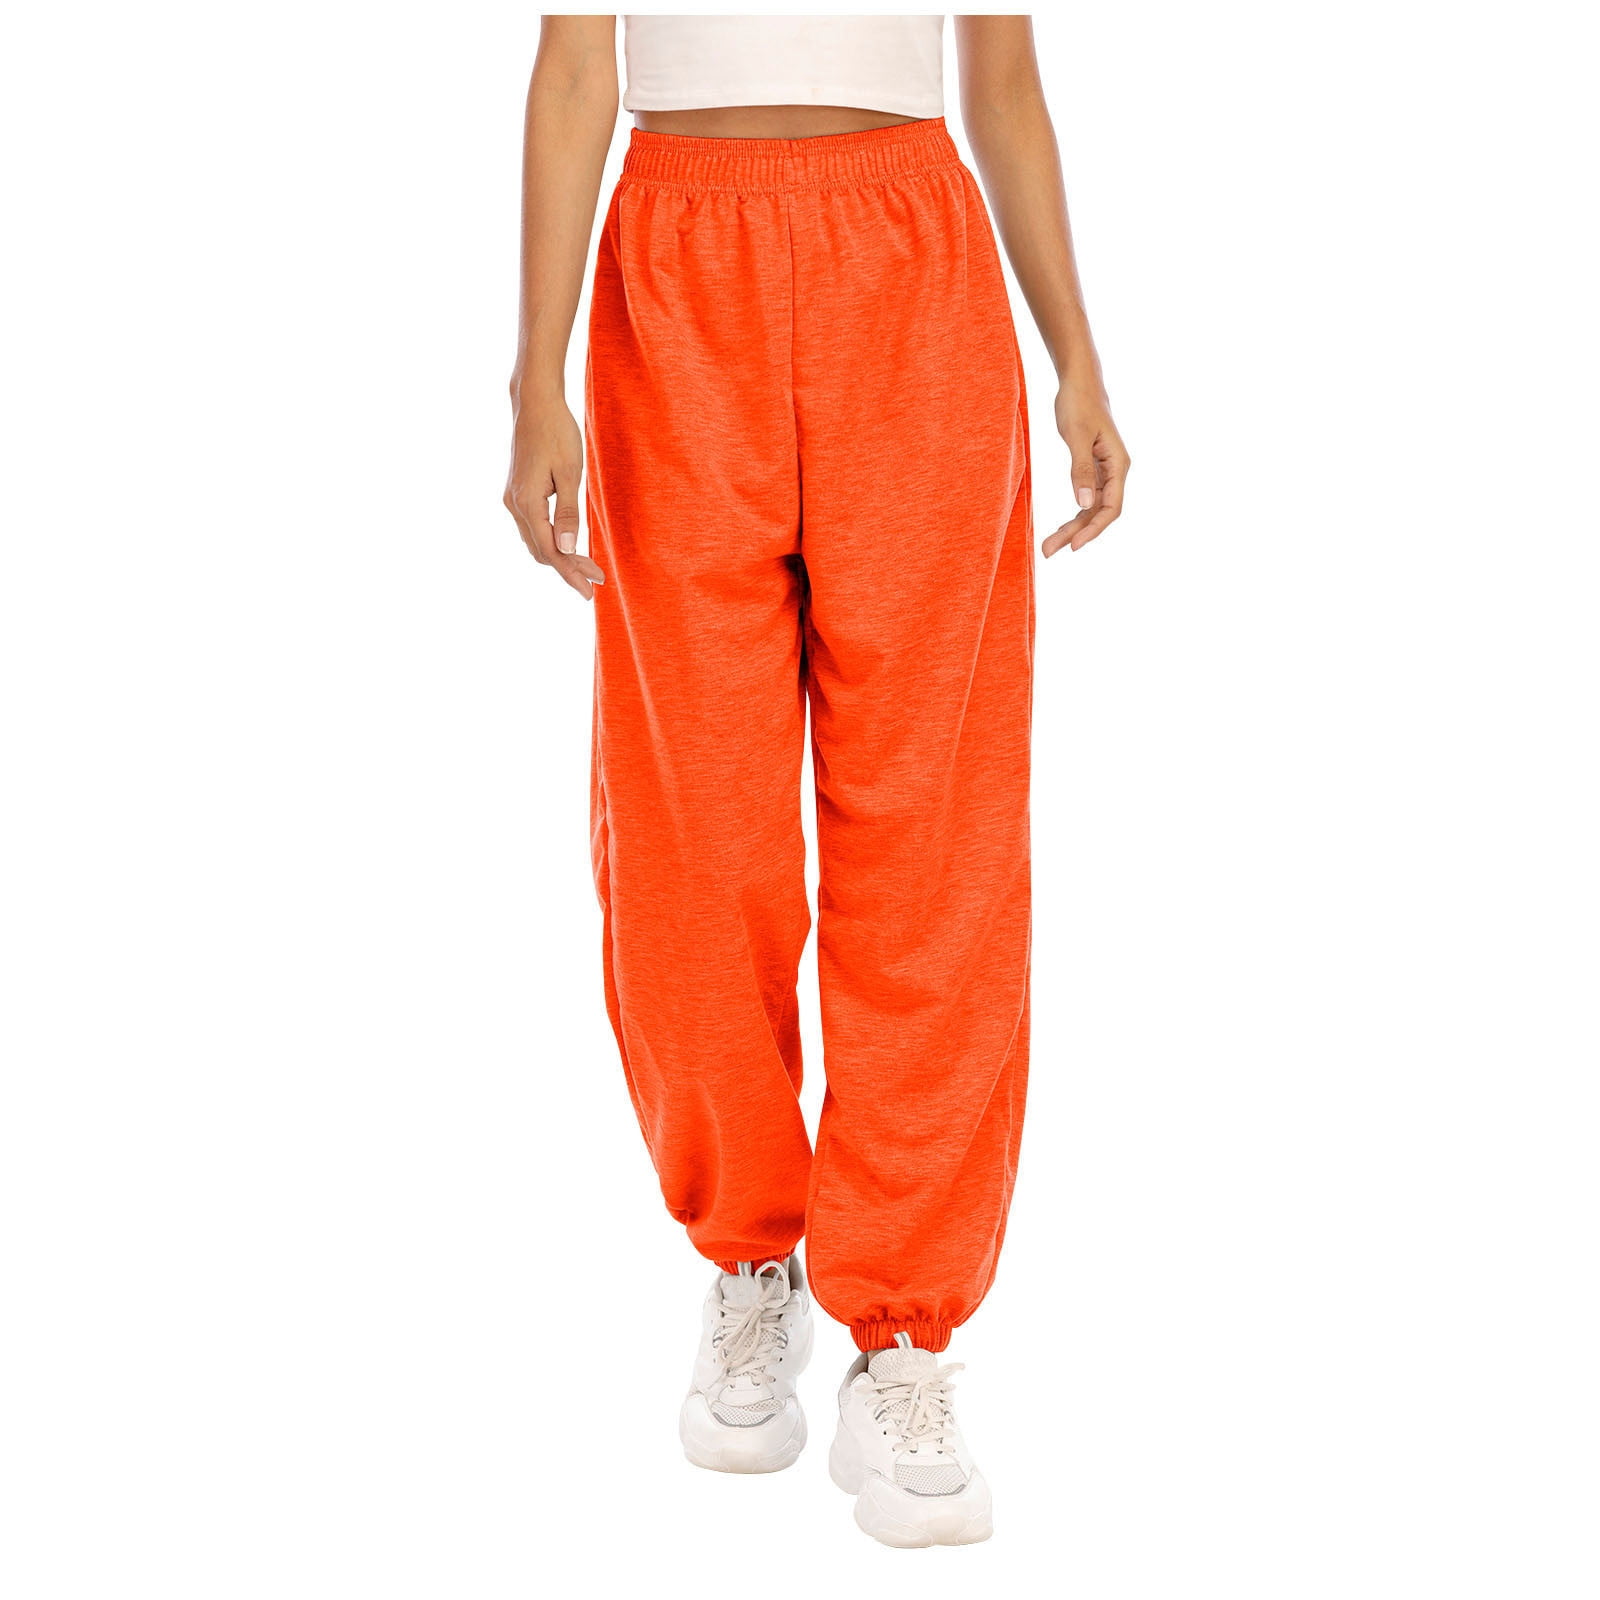 XFLWAM Women's Casual Baggy Sweatpants High Waisted Running Joggers Pants  Athletic Trousers with Pockets Drawstring Track Pants Hot Pink L 